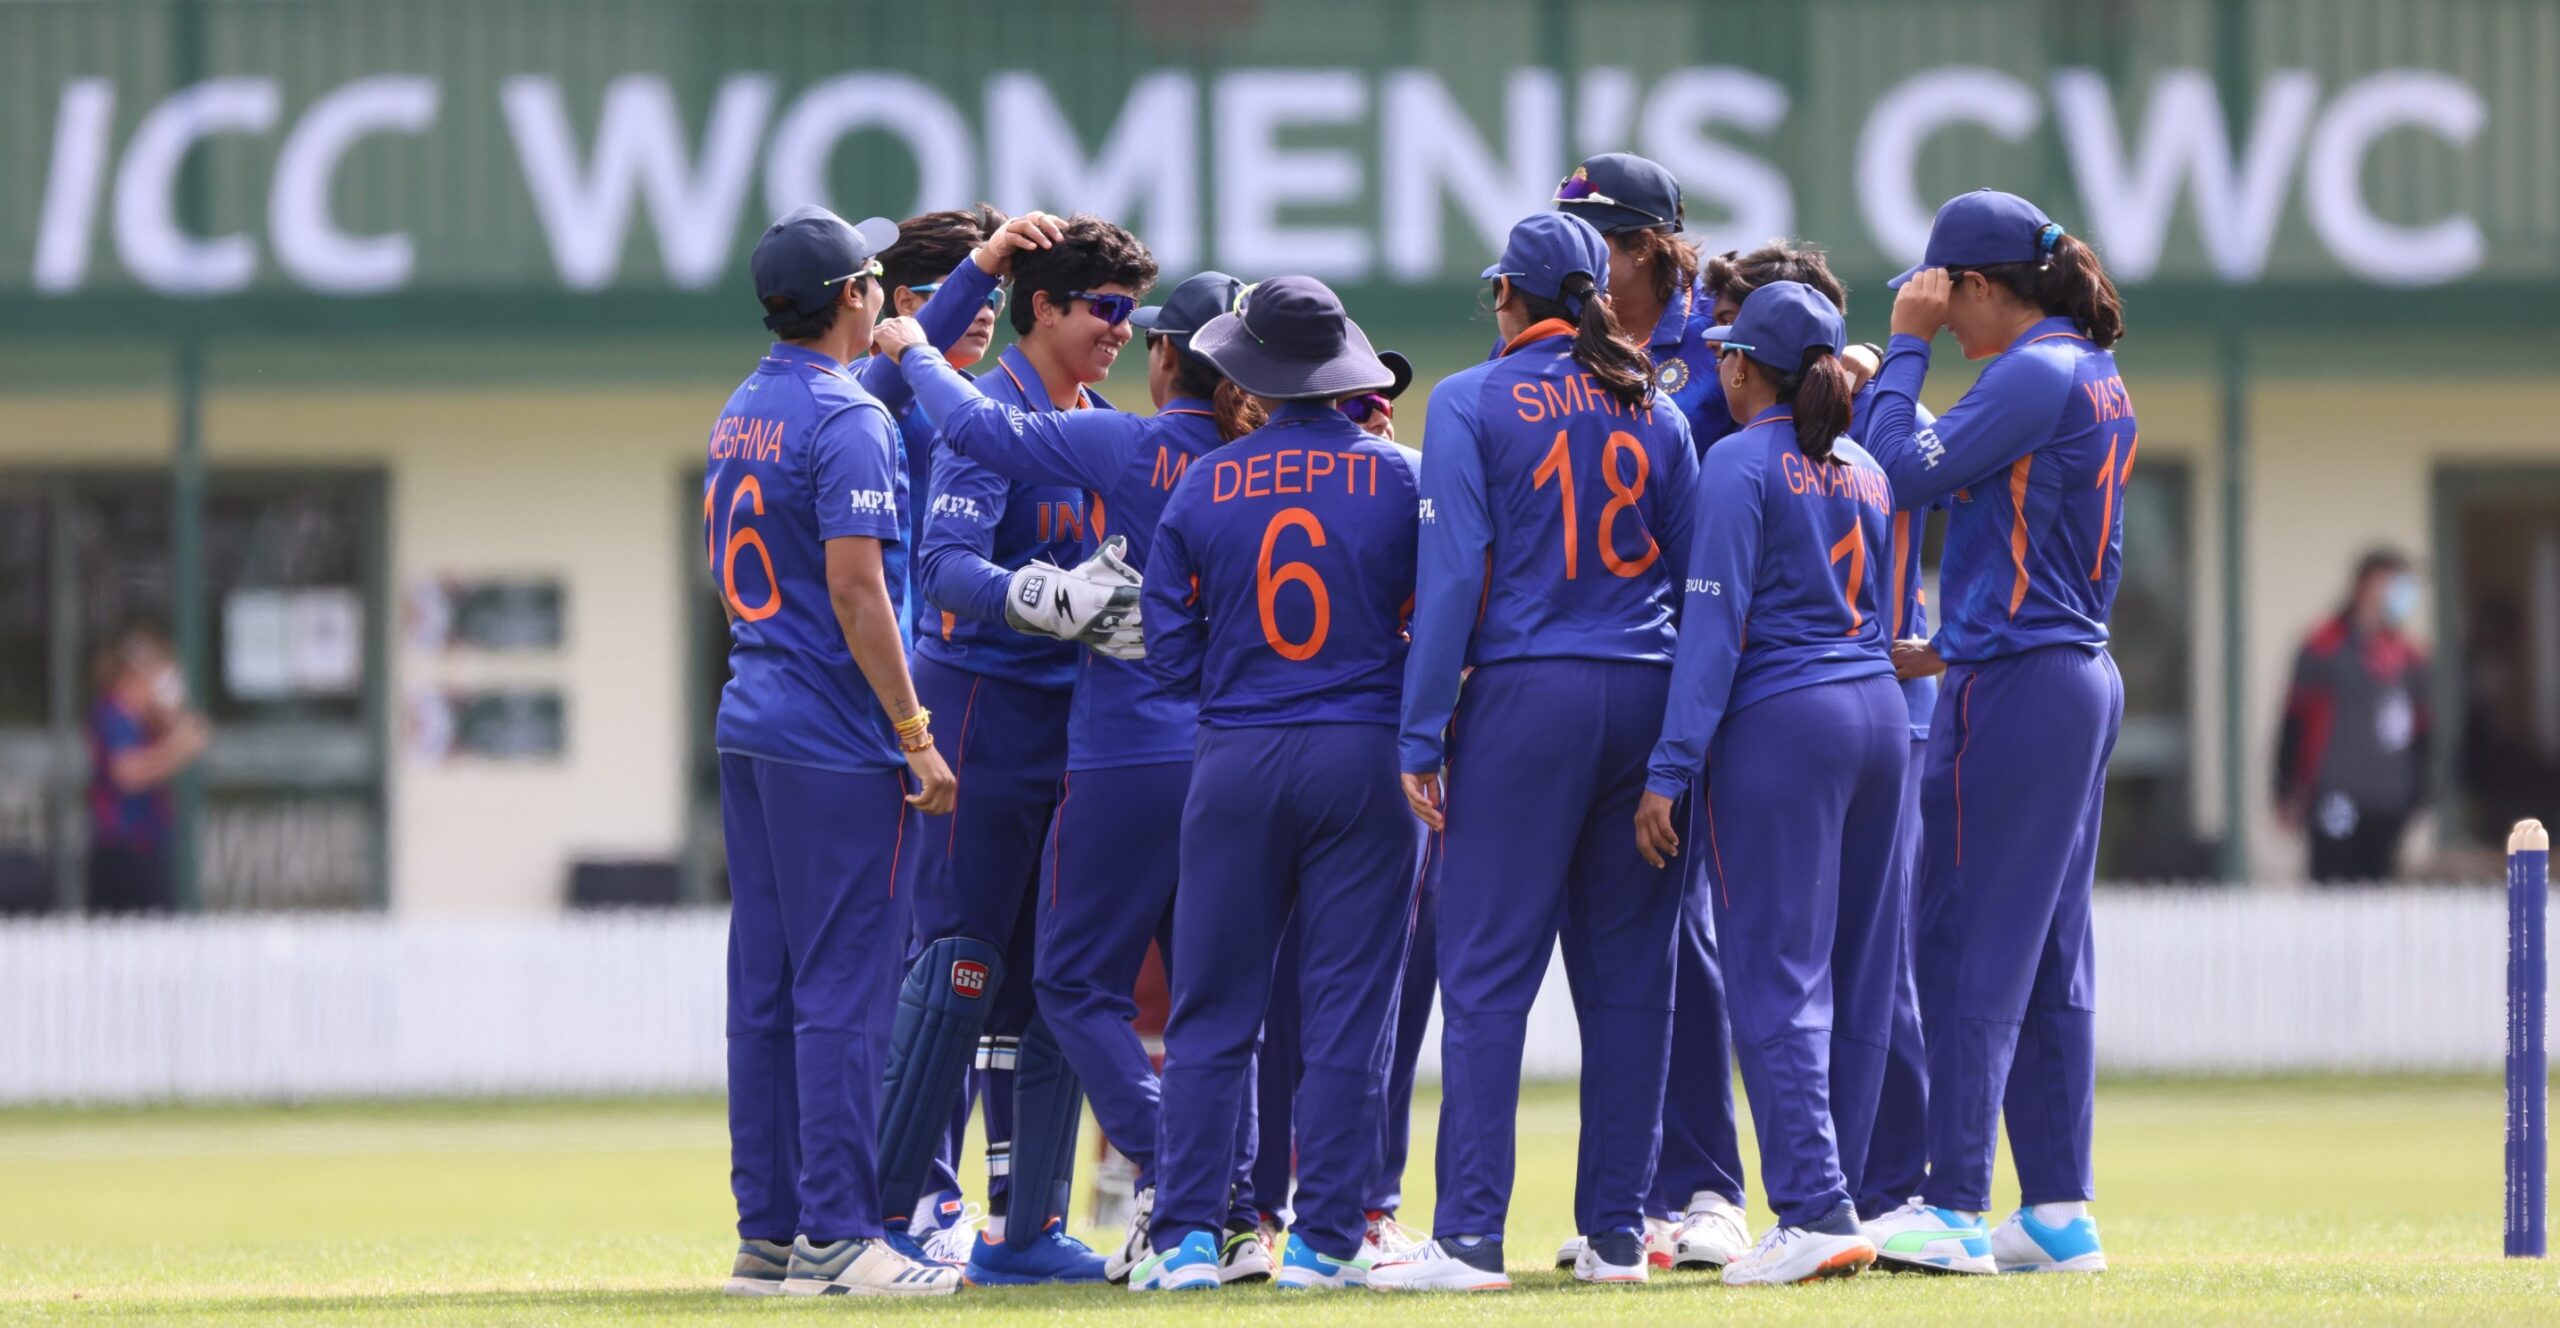  Indian Women’s defeats West Indies Women’s in the warm-up match